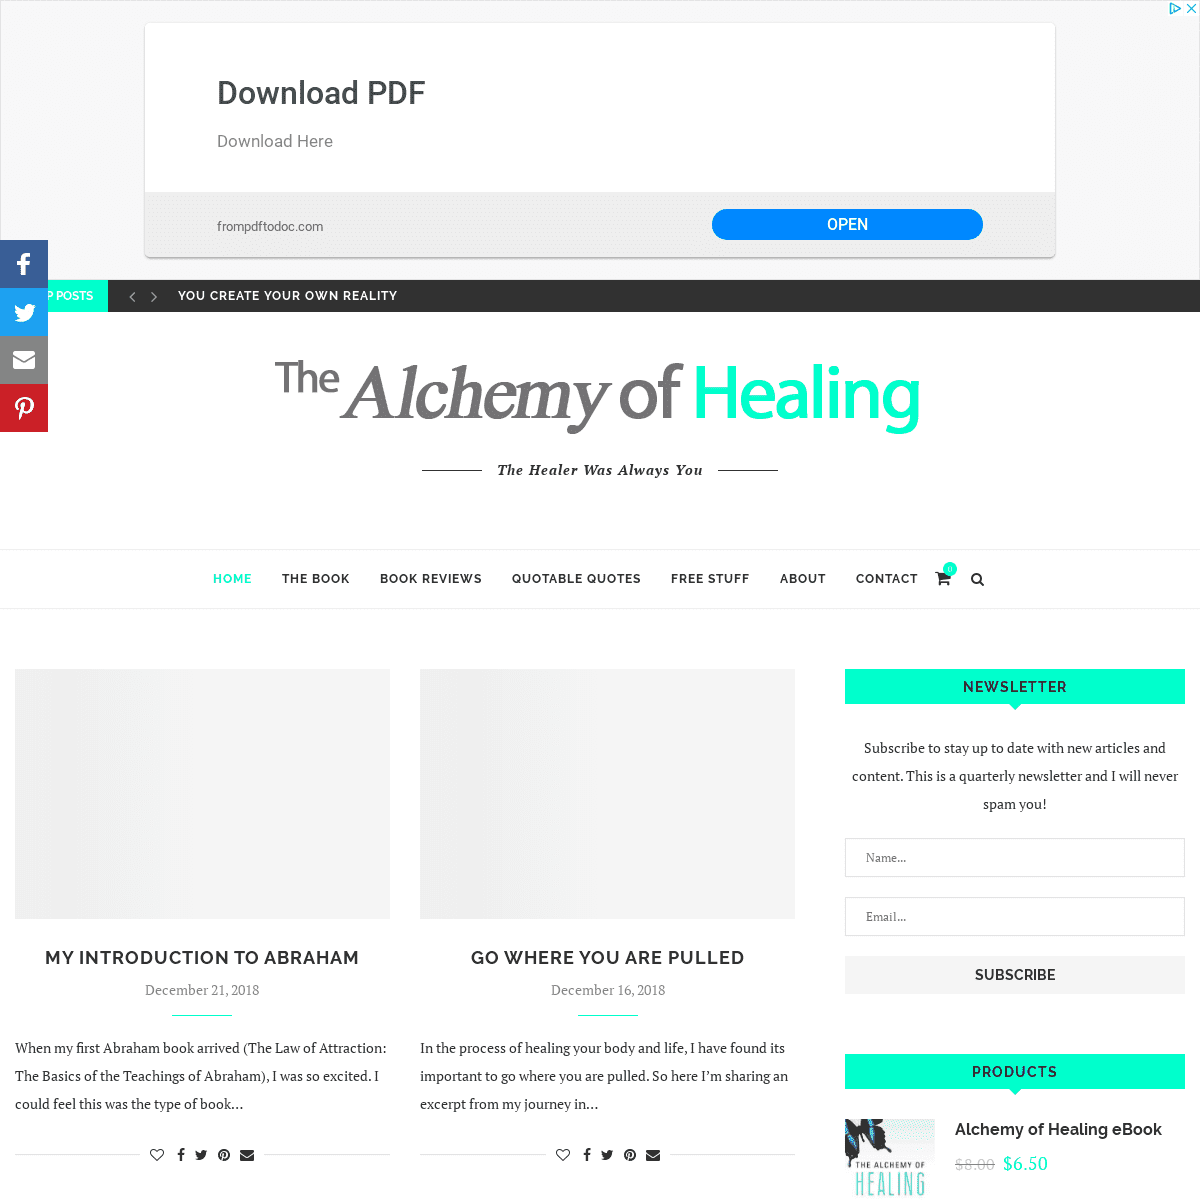 A complete backup of alchemyofhealing.com